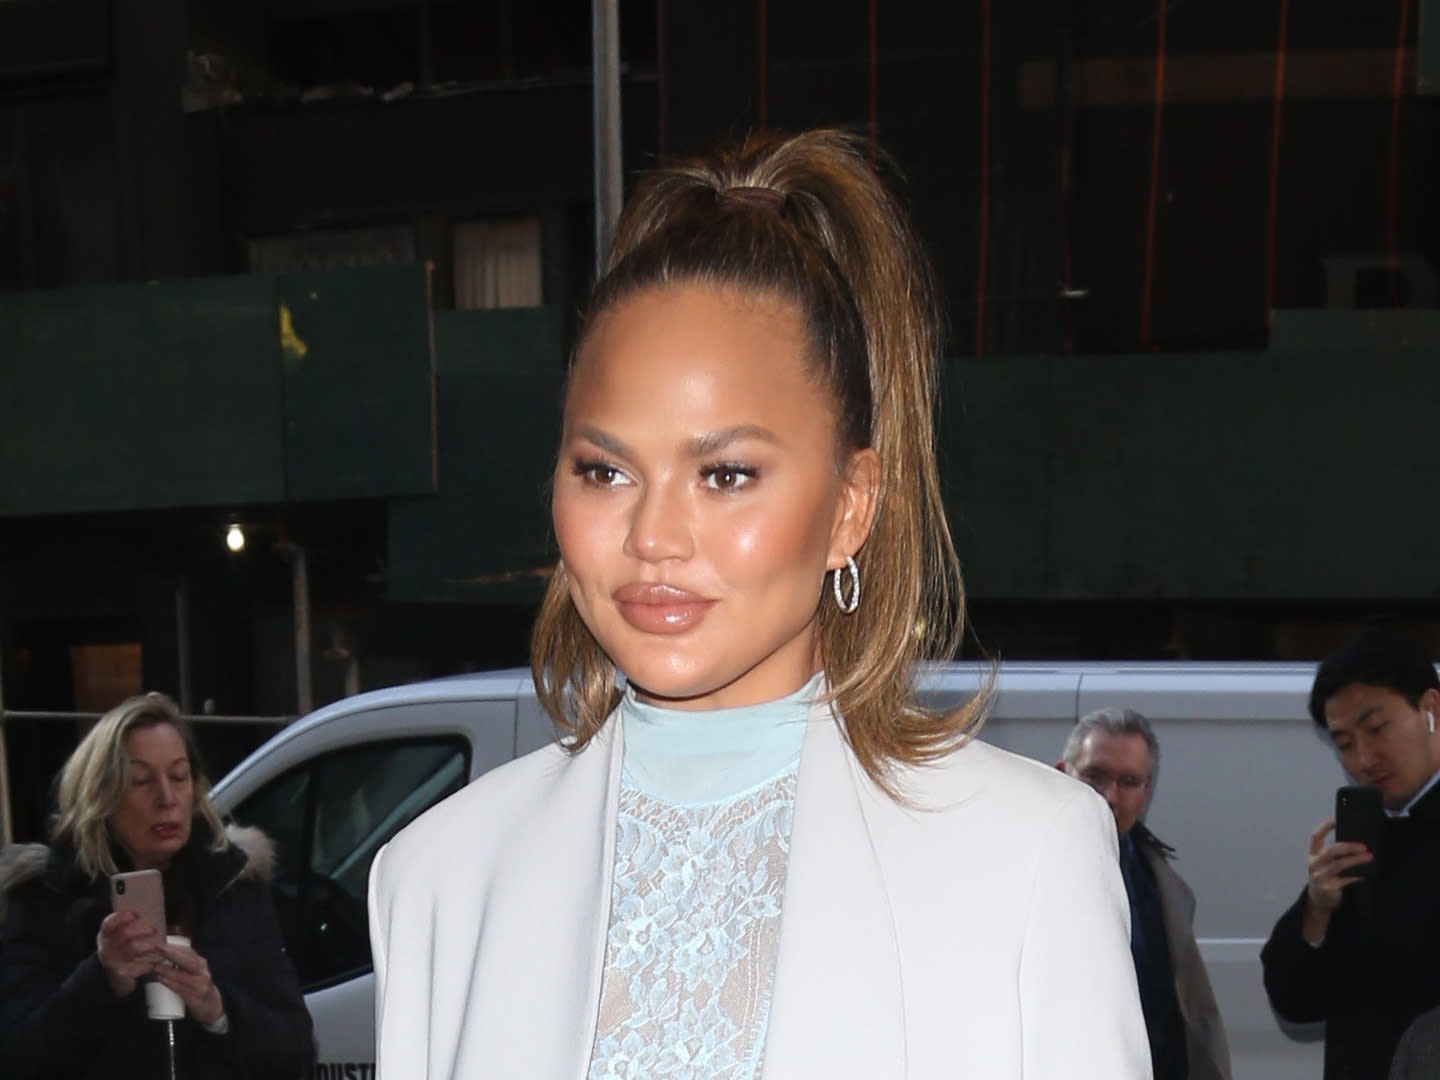 Chrissy Teigen honored Baby Jack on his sweetest date